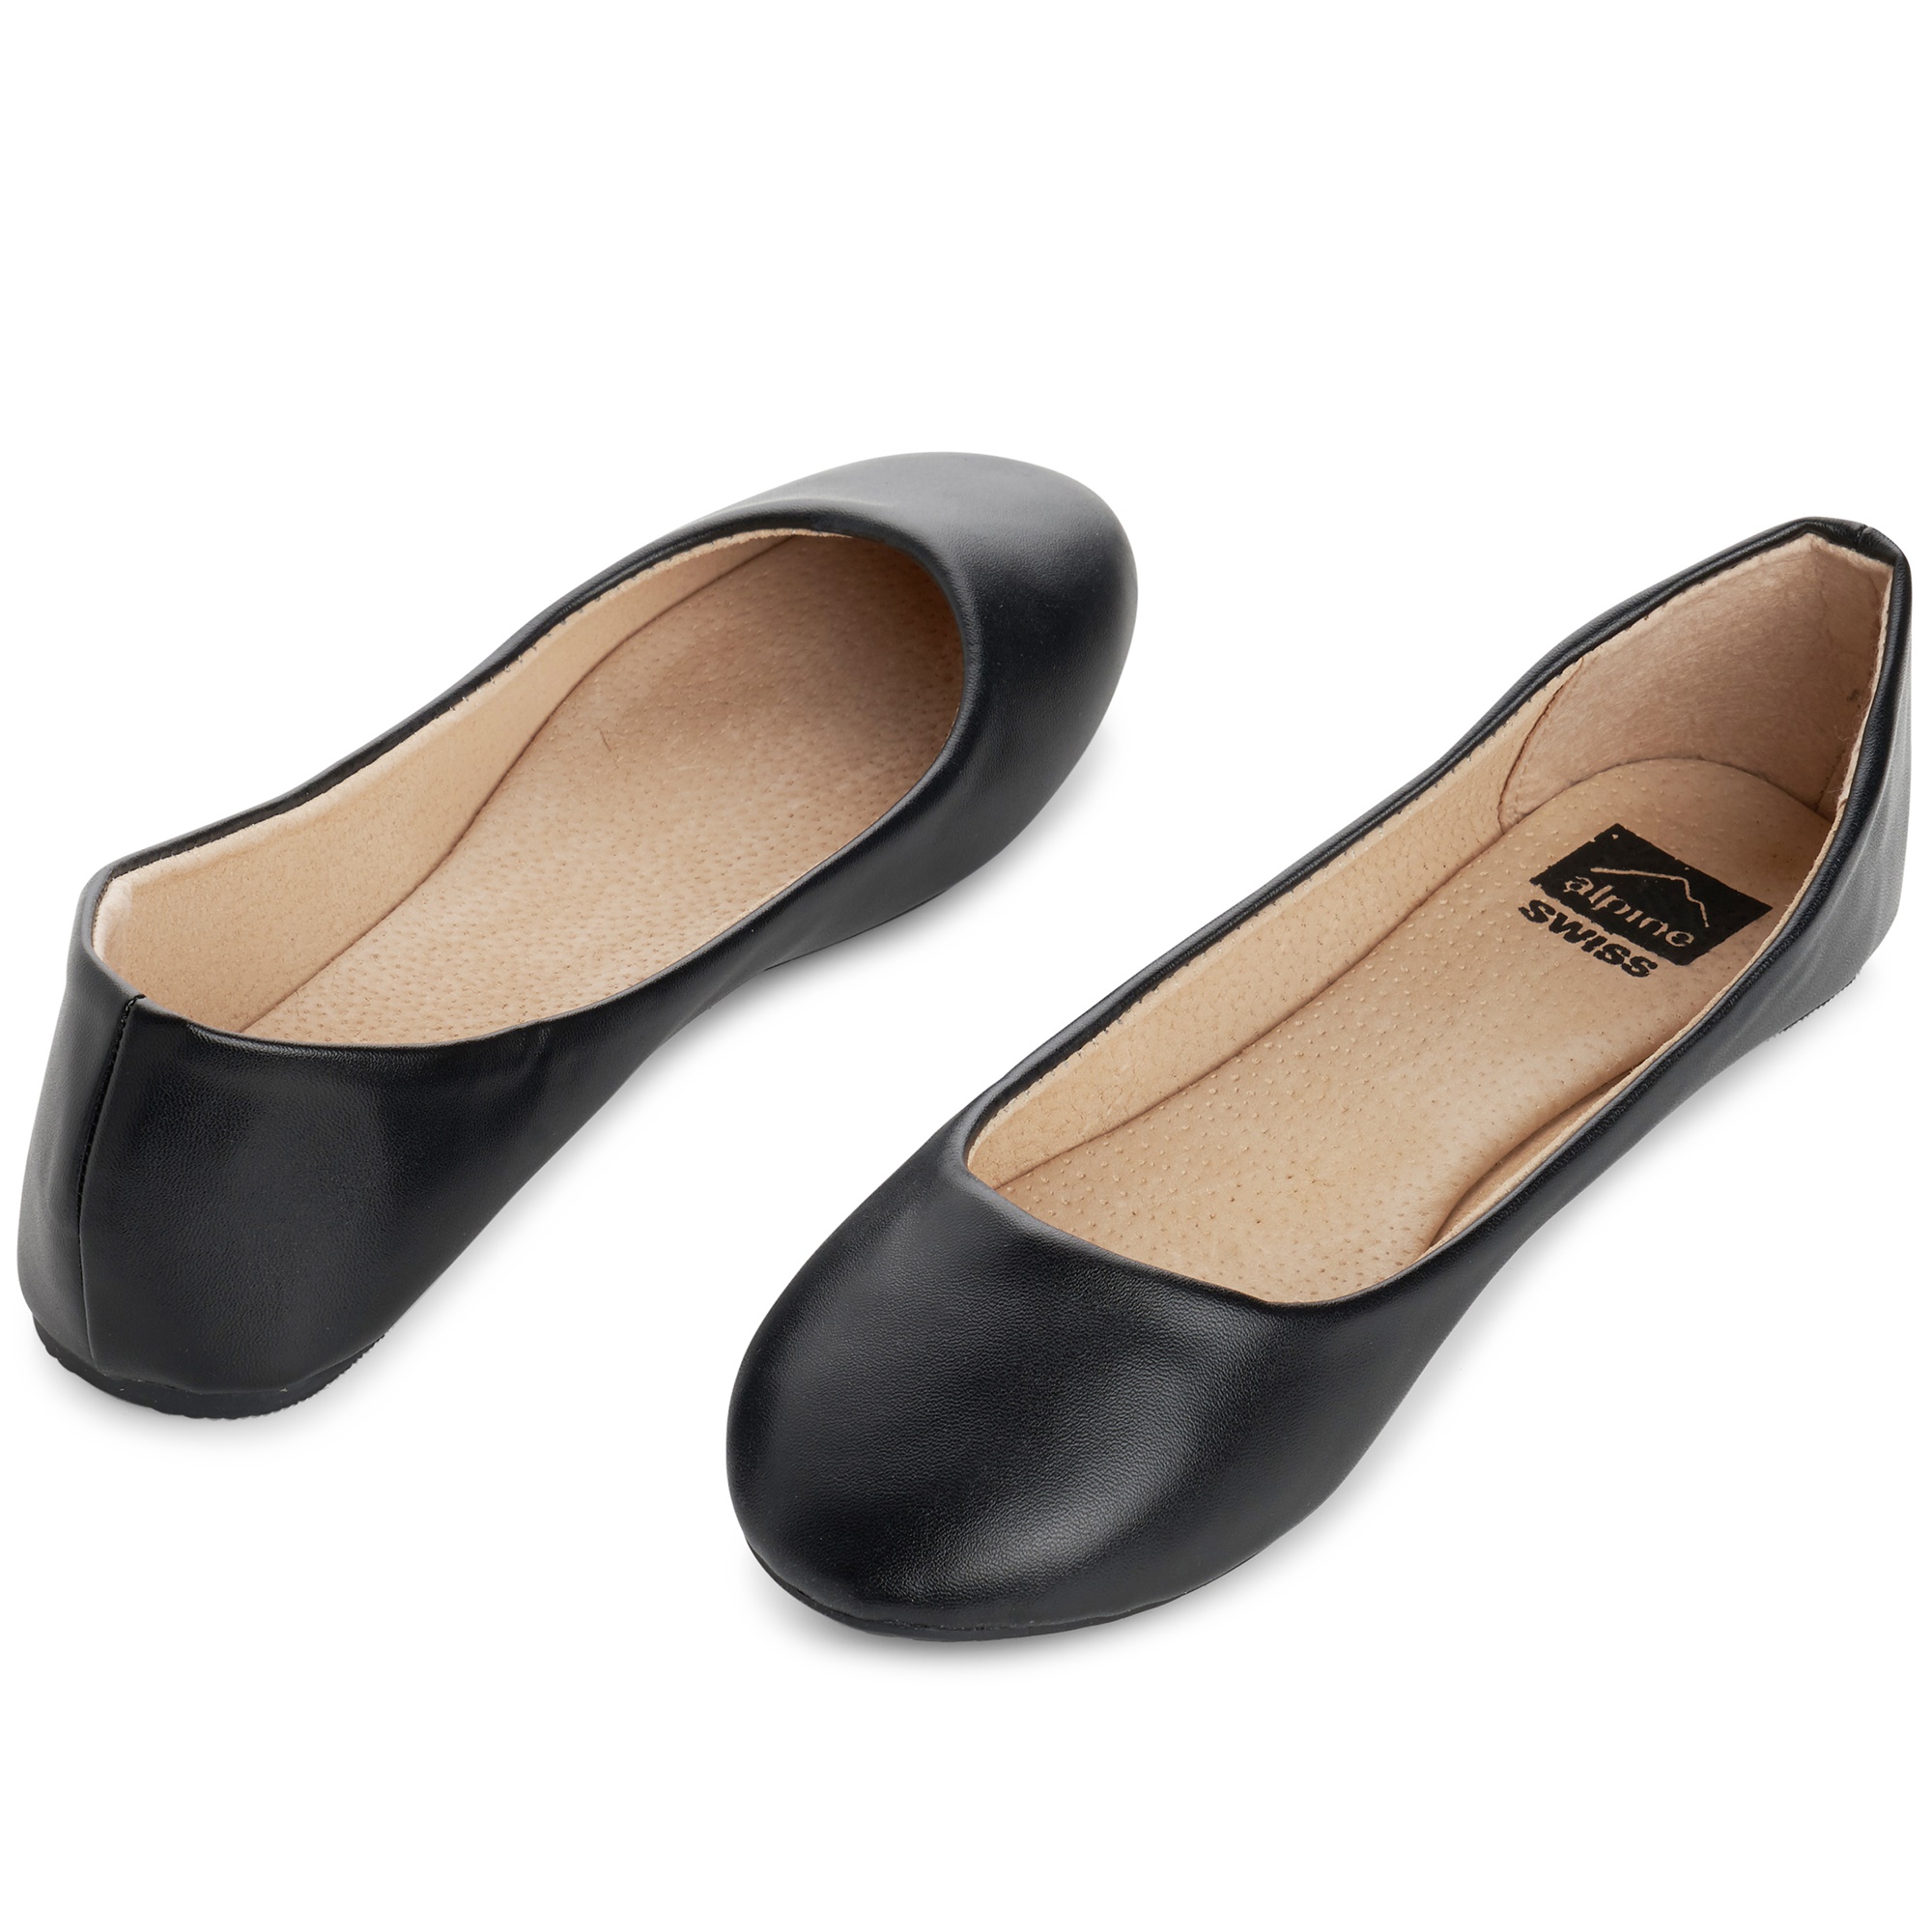 Alpine Swiss Pierina Womens Ballet Flats Leather Lined Classic Slip On Shoes - image 2 of 7